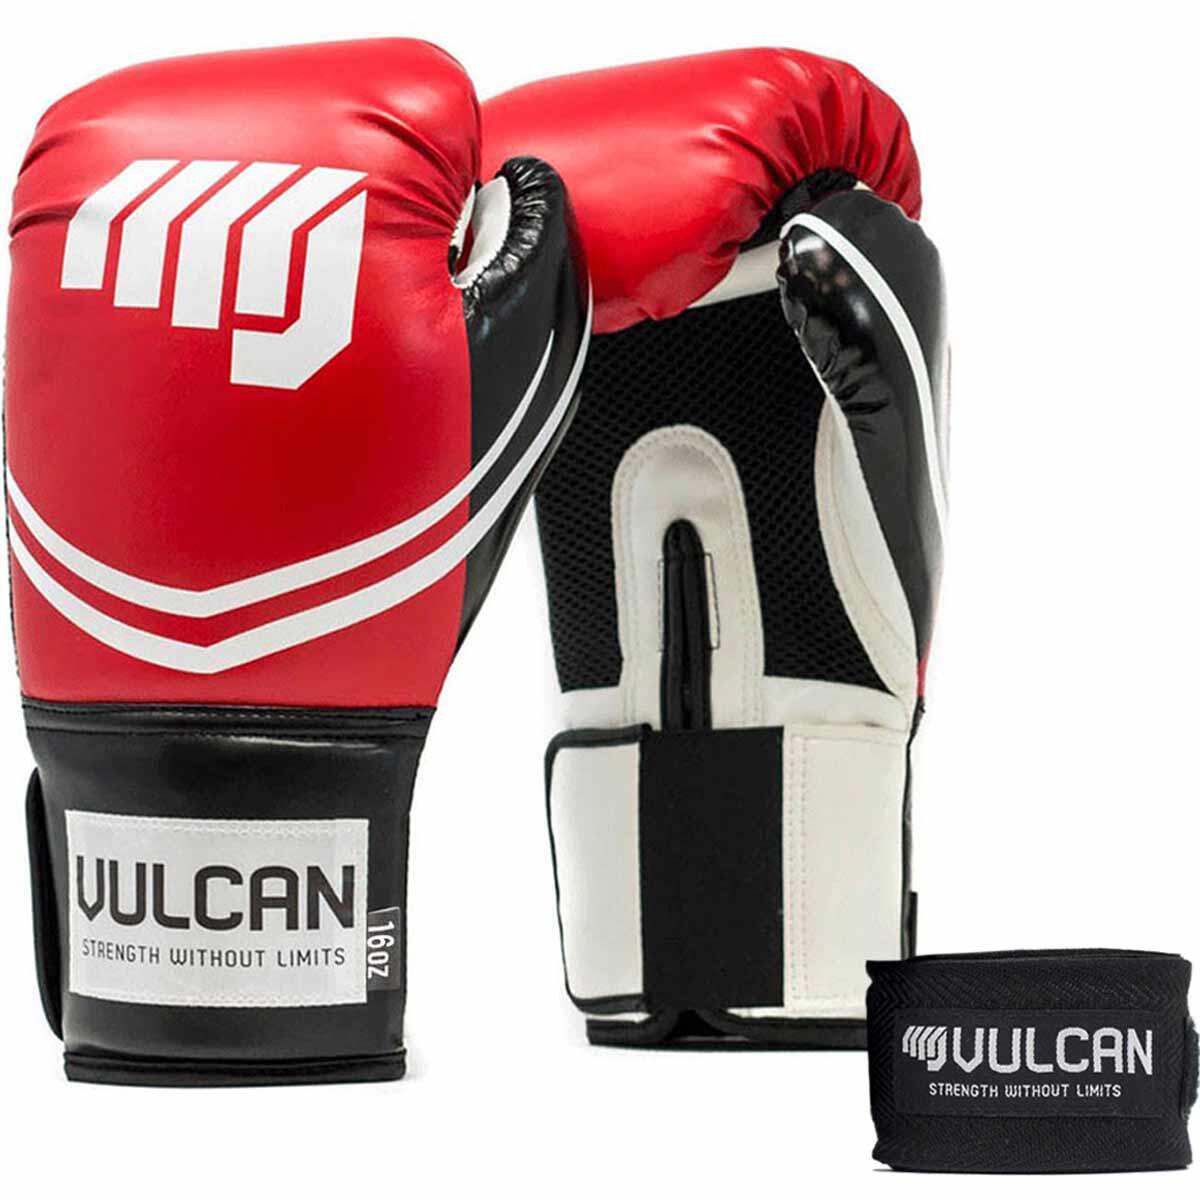 VULCAN BOXING GLOVES 16oz RED/BLACK WITH HANDWRAPS